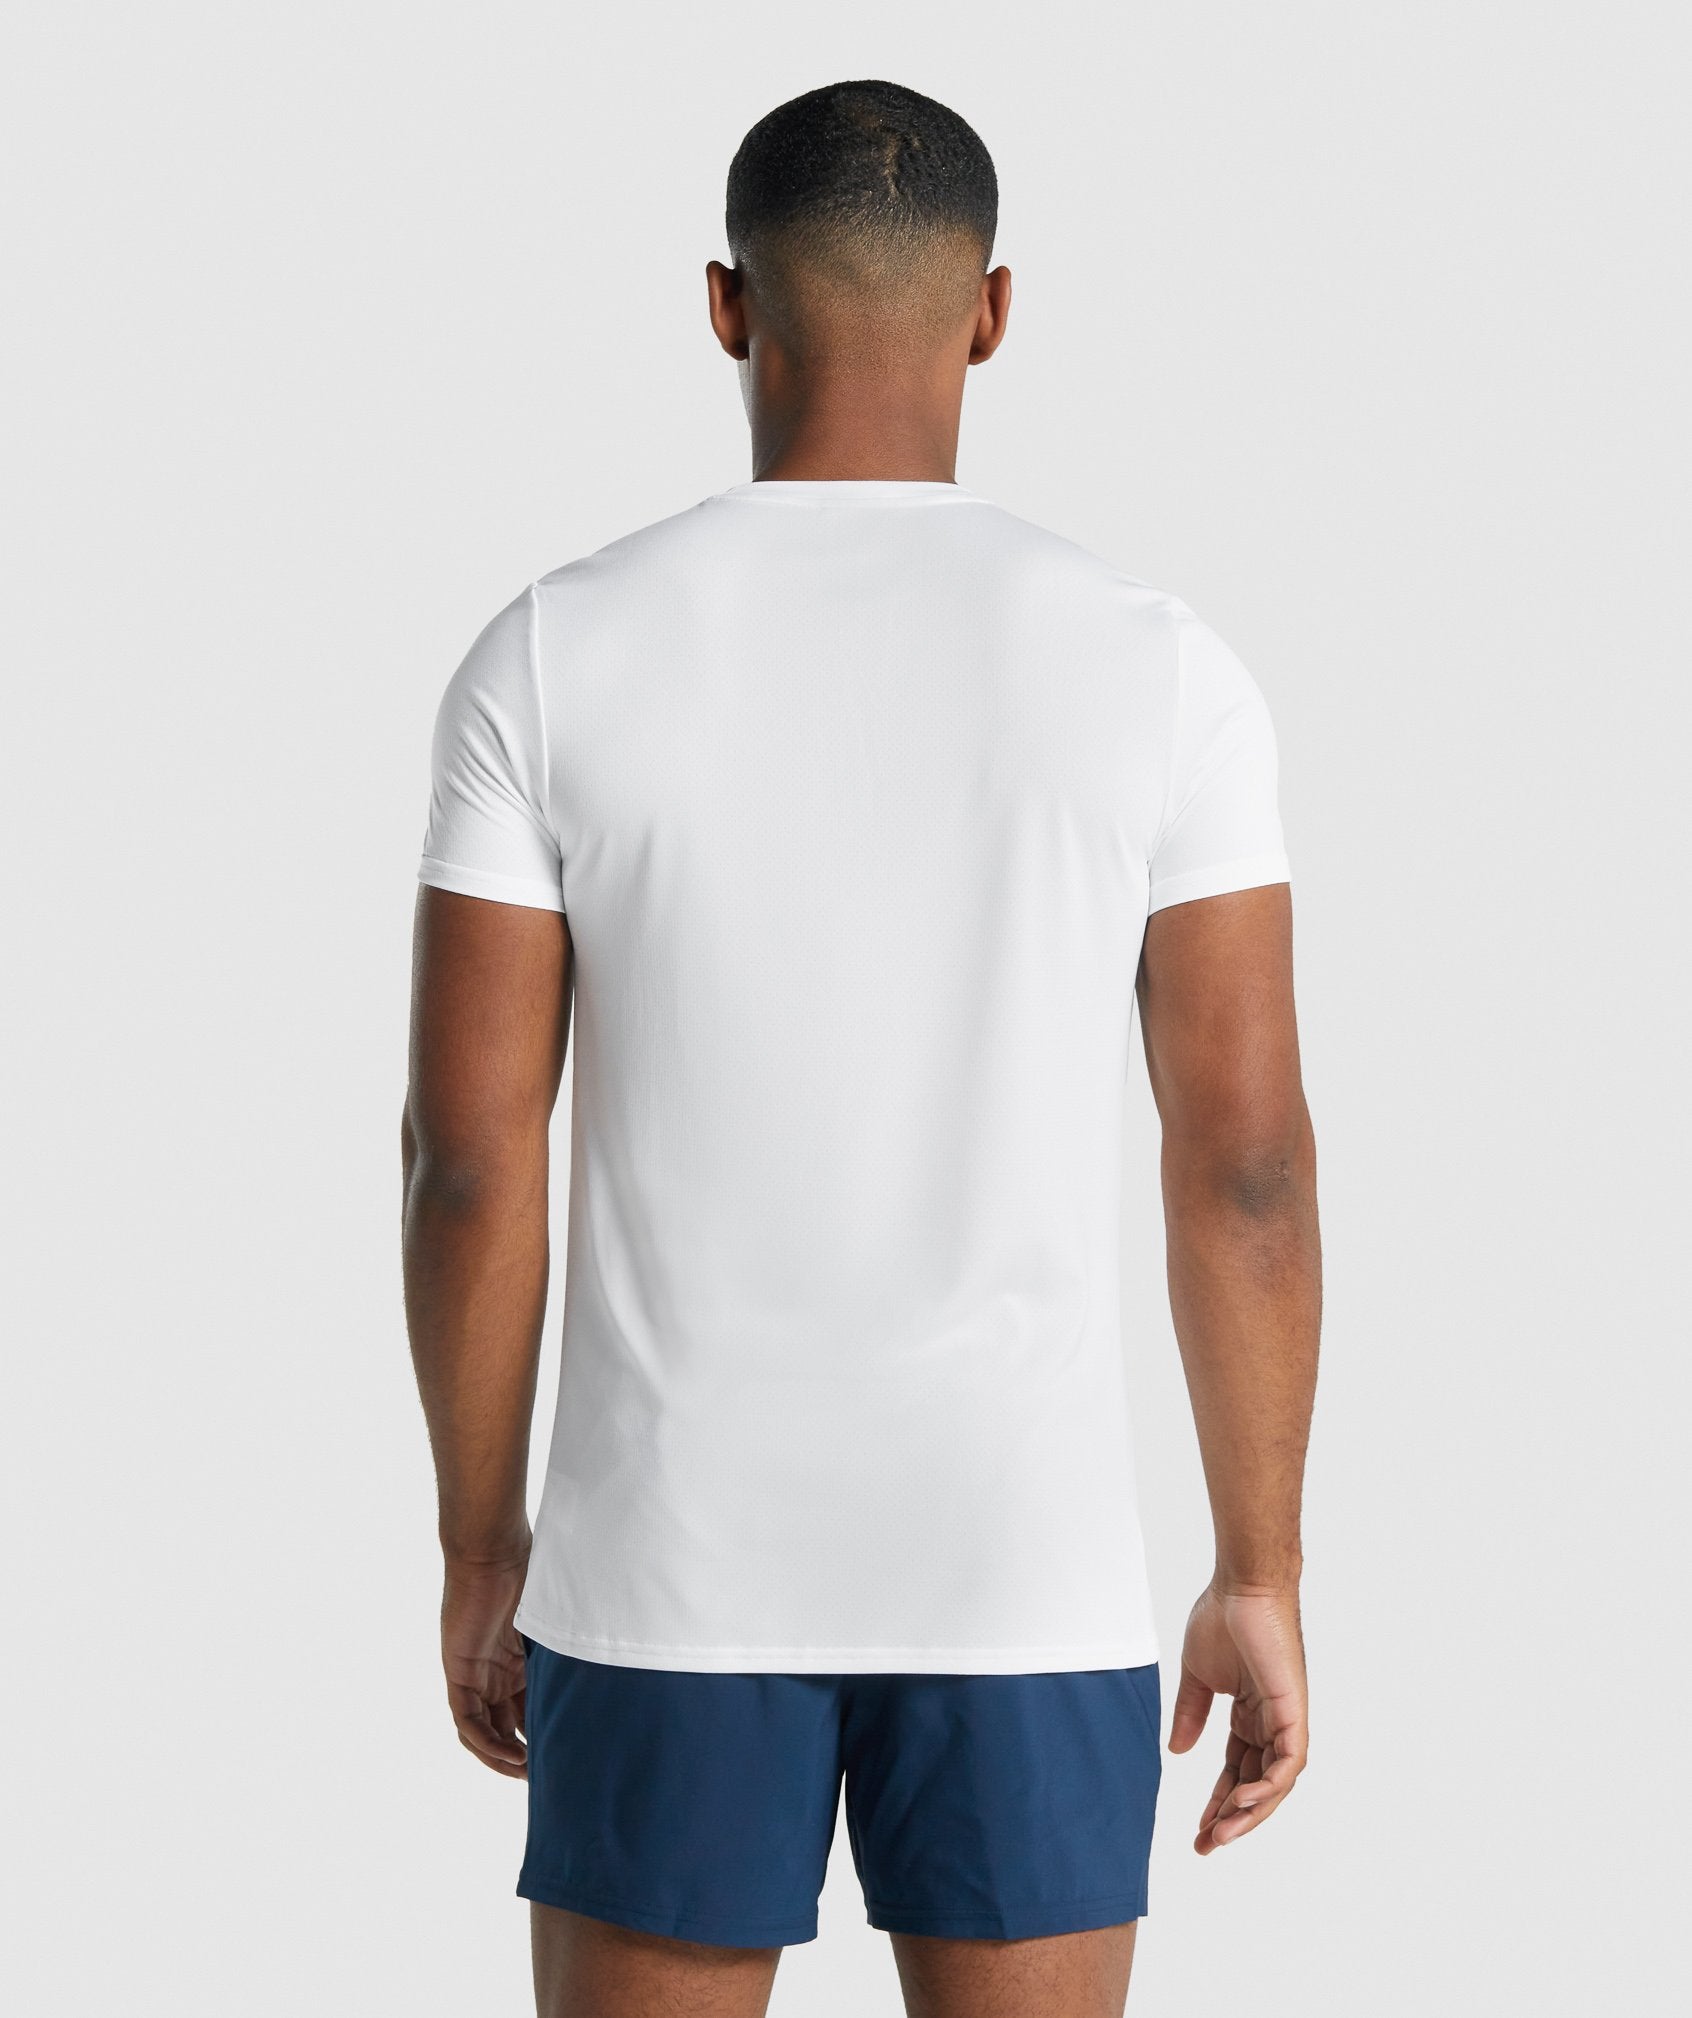 Arrival Graphic T-Shirt in White